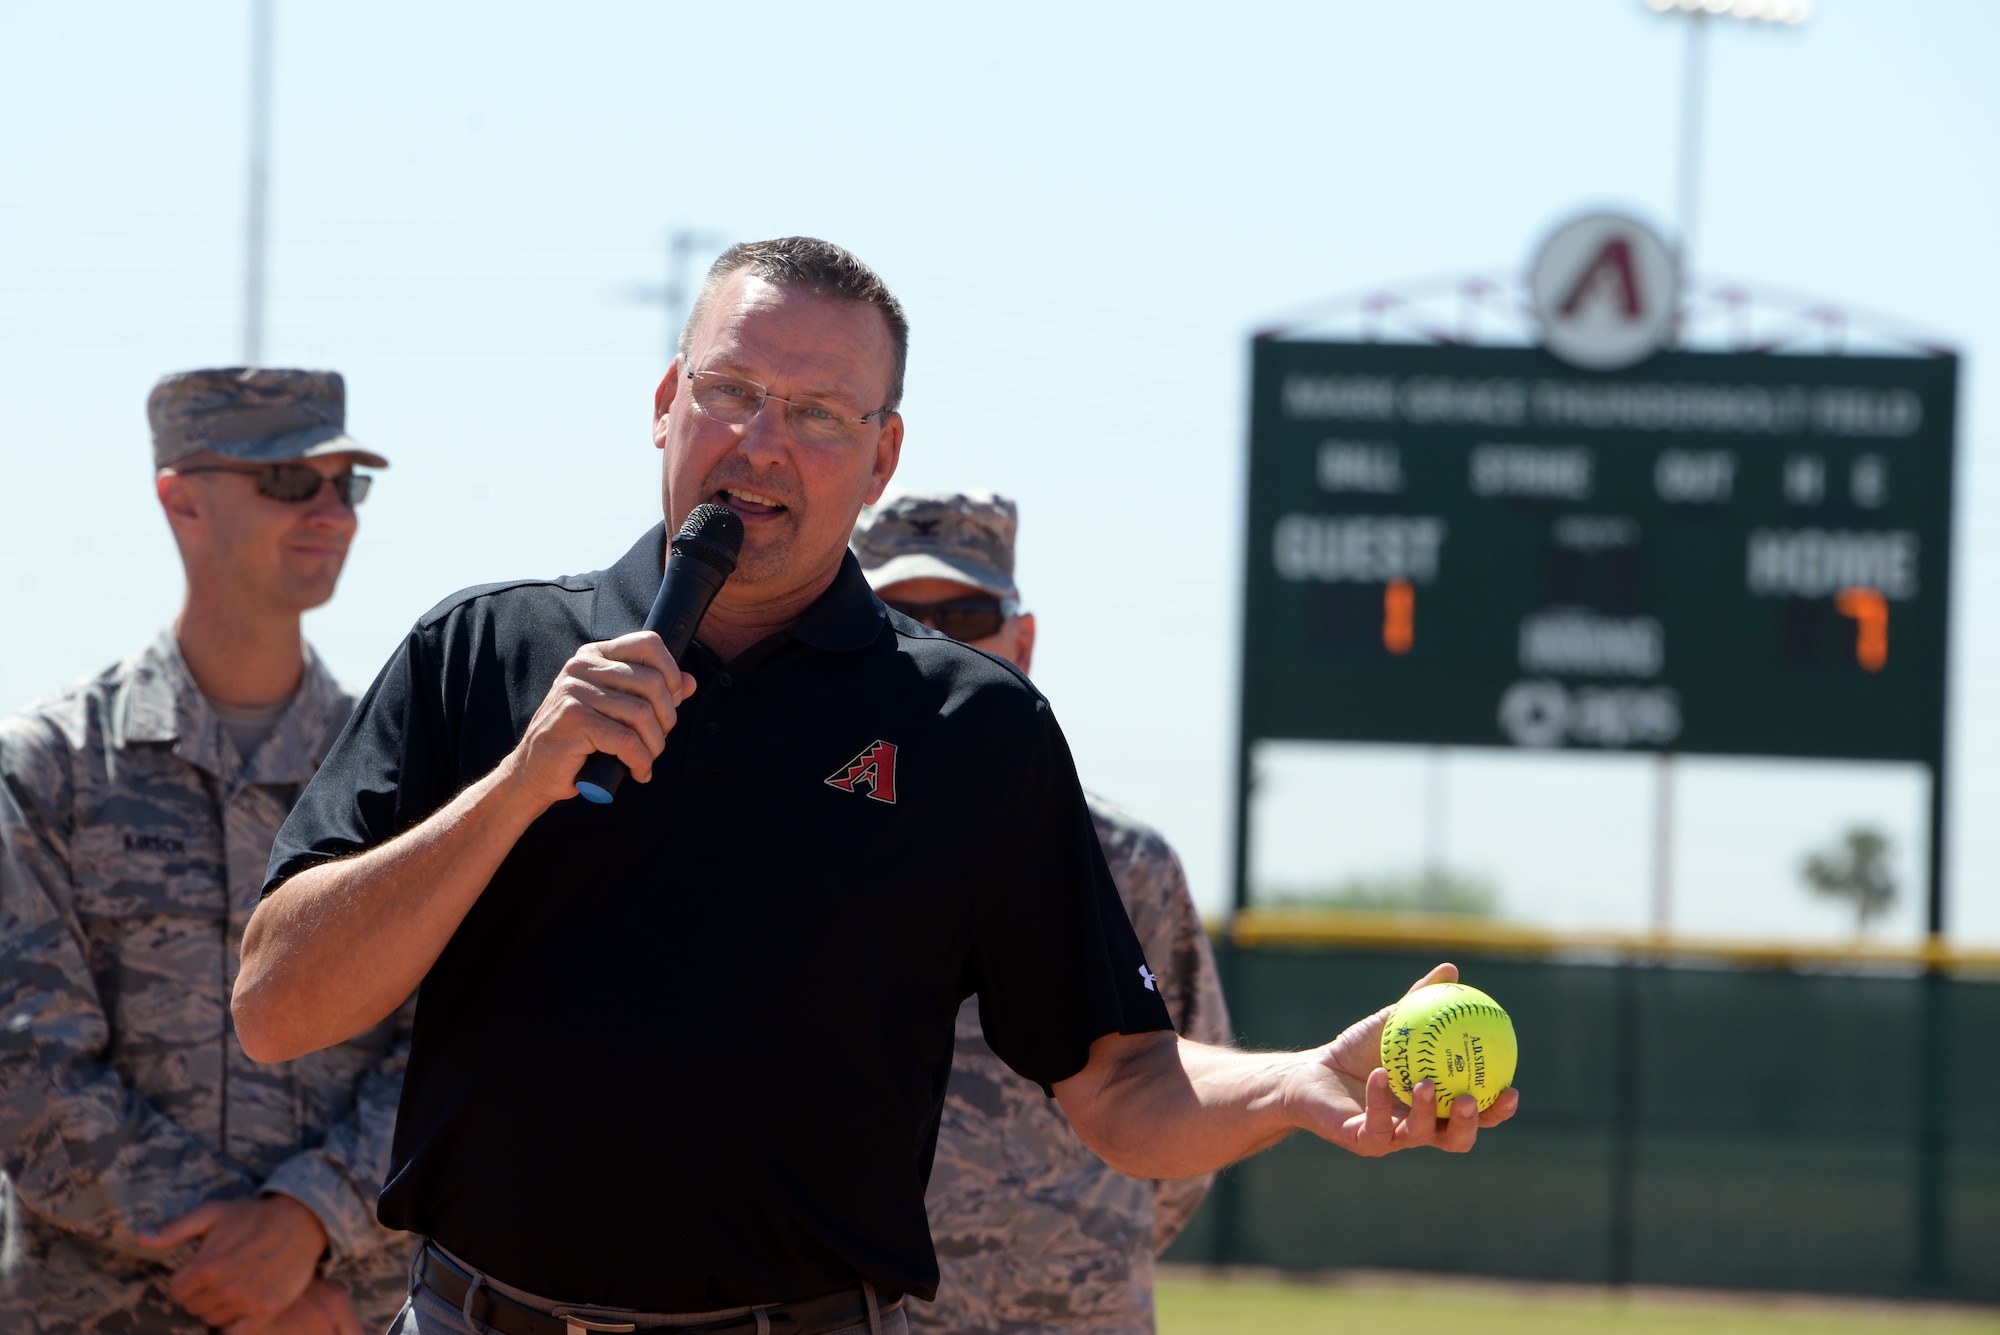 Mark Grace, former Arizona Diamondbacks first baseman, speaks with Thunderbolts during a ribbon cutting ceremony April 23, 2018, at Luke Air Force Base, Ariz. The Diamondbacks, together with Arizona Public Service, presented Luke AFB with a new scoreboard for field number three. (U.S. Air Force photo by Senior Airman Devante Williams)